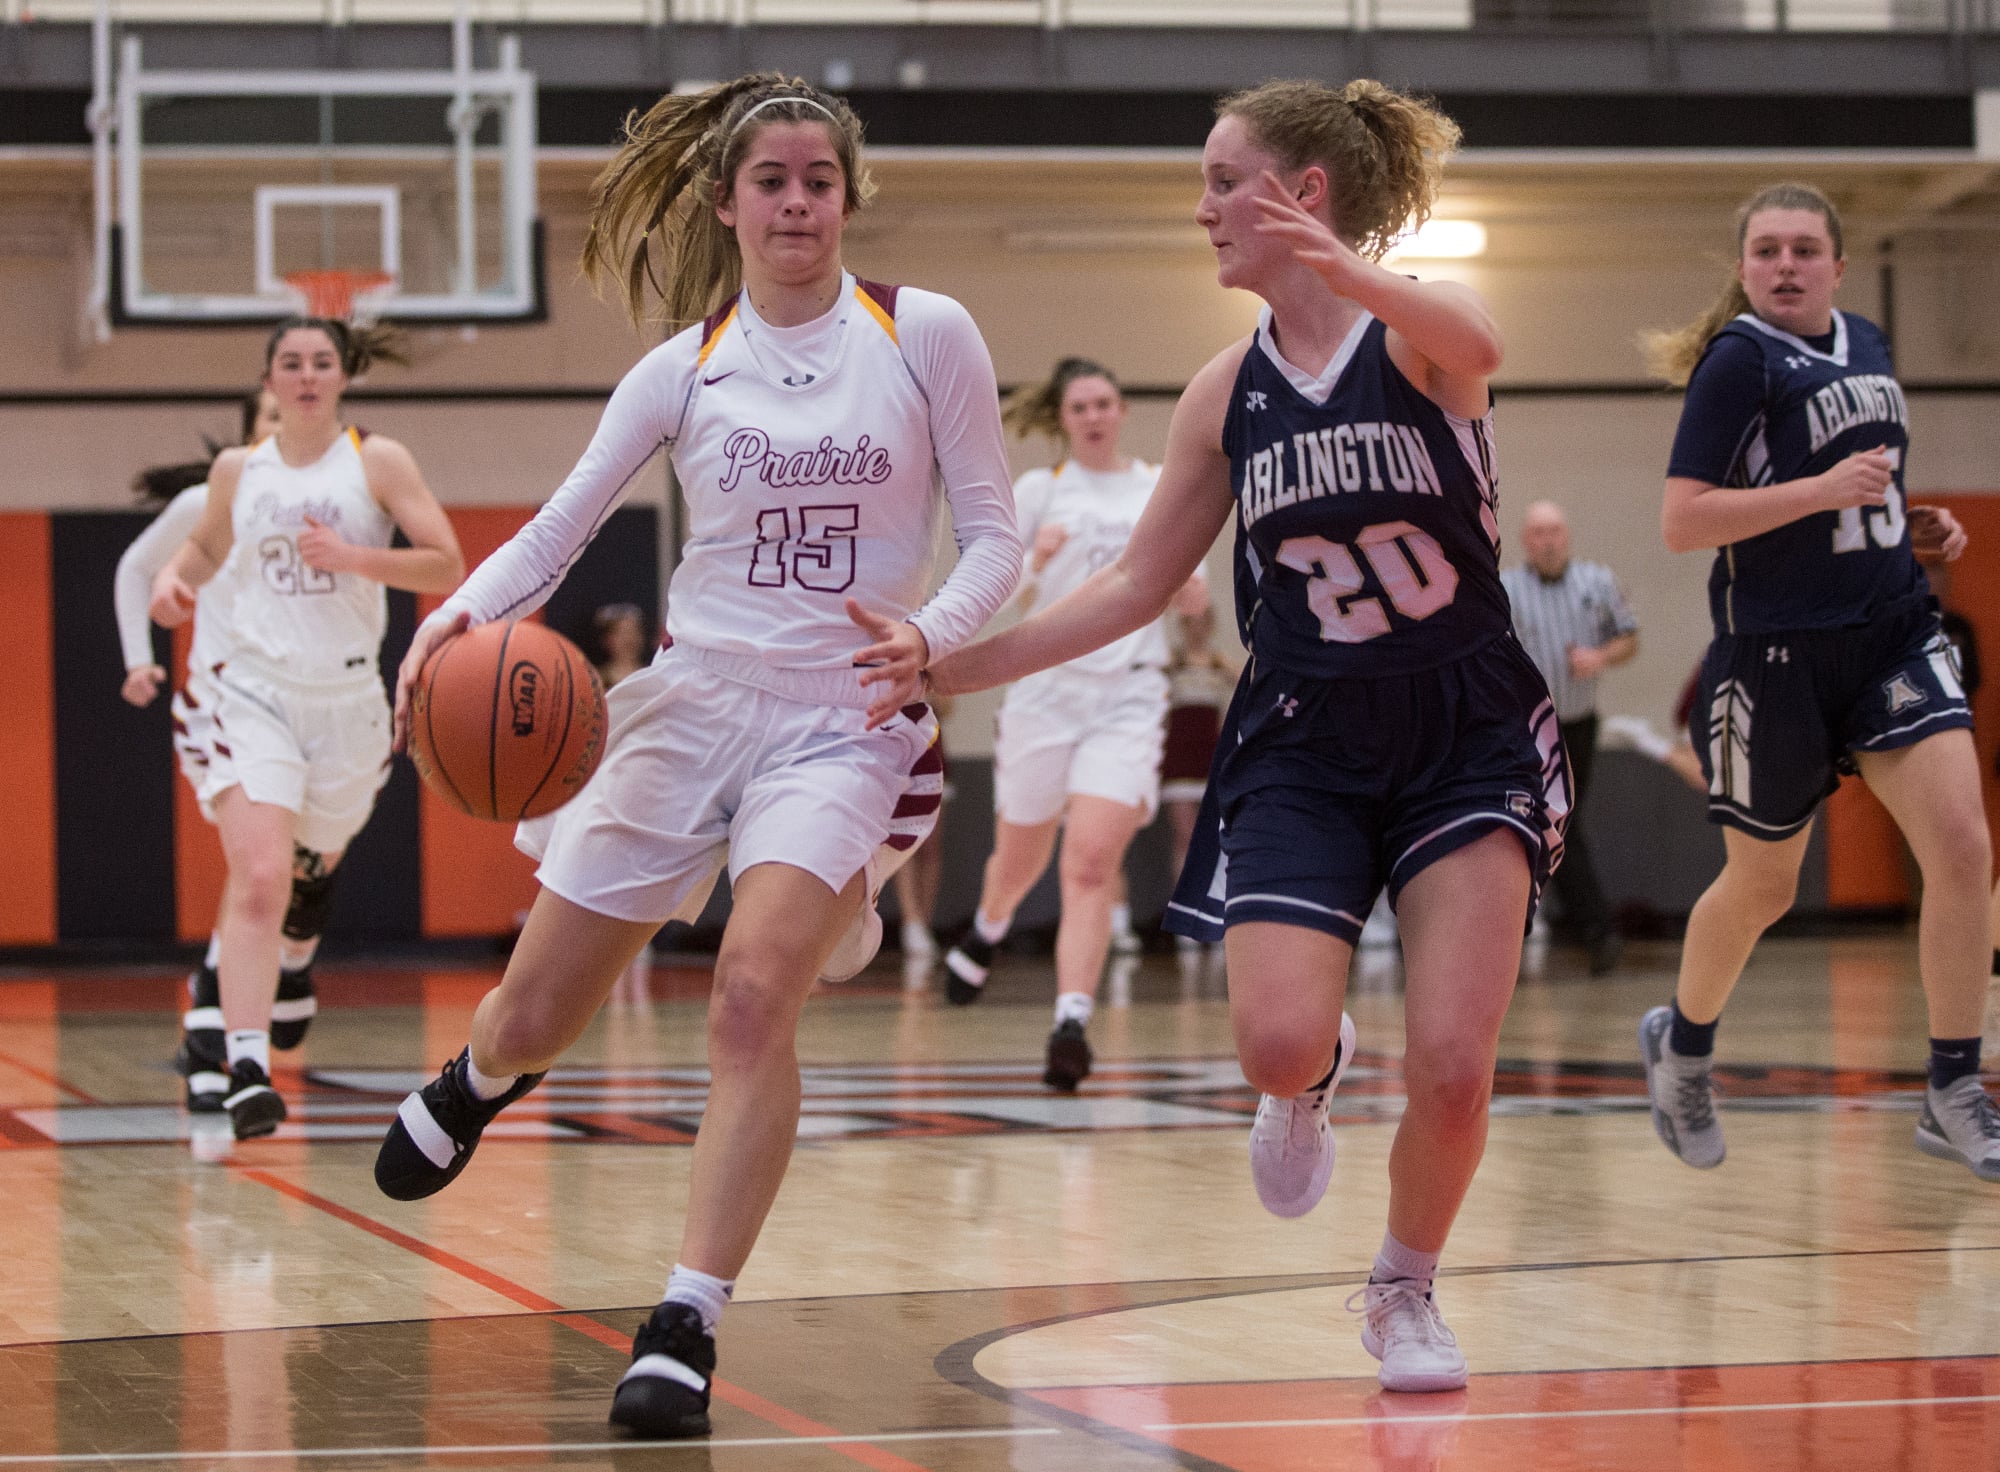 Prairie's Cassidy Gardner (15) attempts to dribble past Arlington's Sierra Scheppele (20) during the first half of a 3A regional basketball game at Battle Ground High School, Saturday, Feb. 23, 2019. Prairie went on to defeat Arlington 55-46.